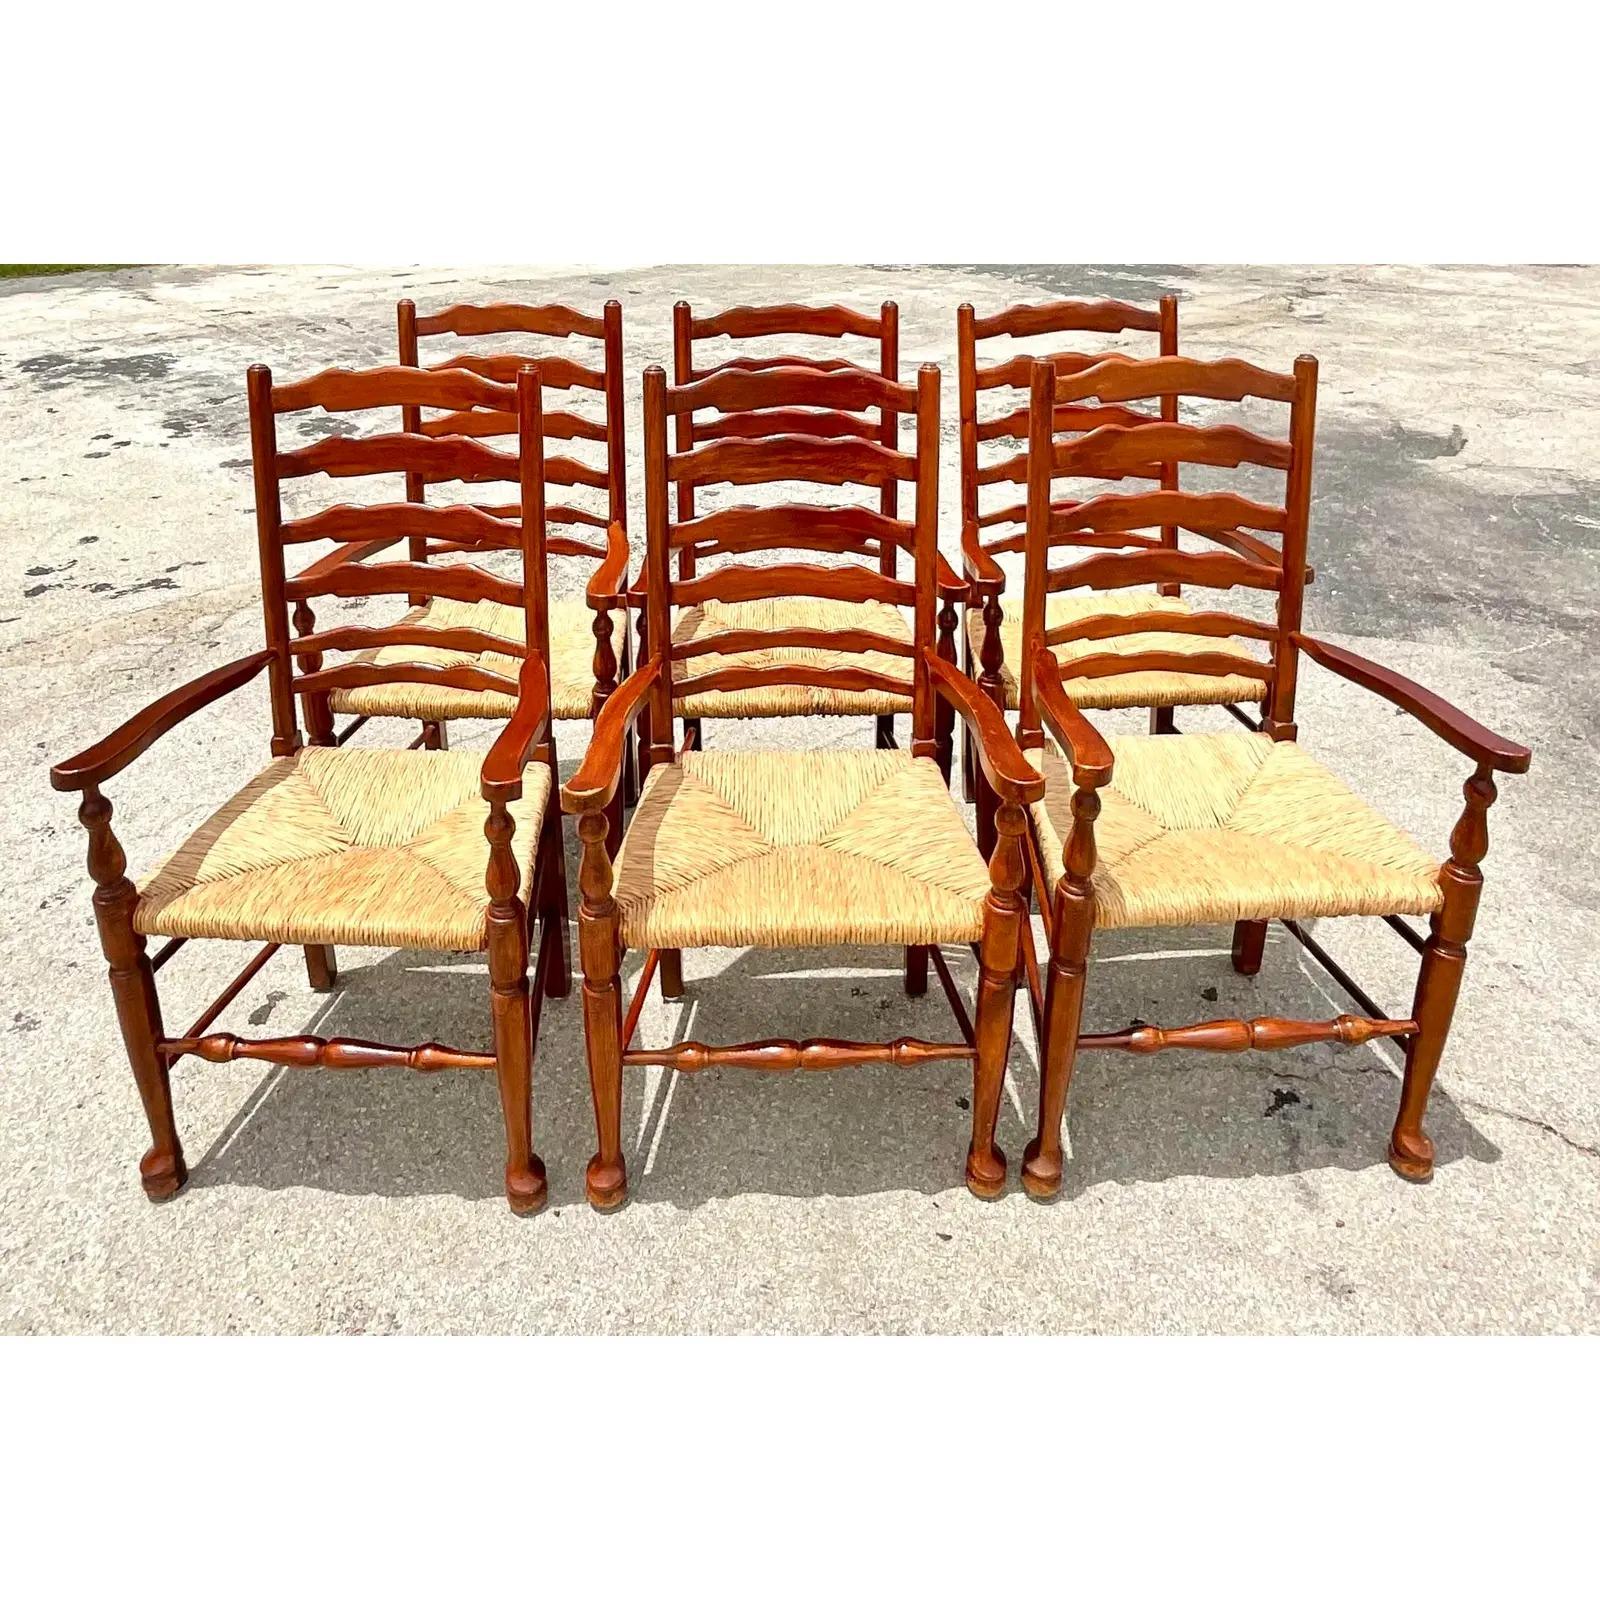 Fantastic set of vintage Boho dining chairs. Made by the iconic Pierre Deux group. Beautiful rush seats with a Classic ladder back design. Acquired from a Palm Beach estate.